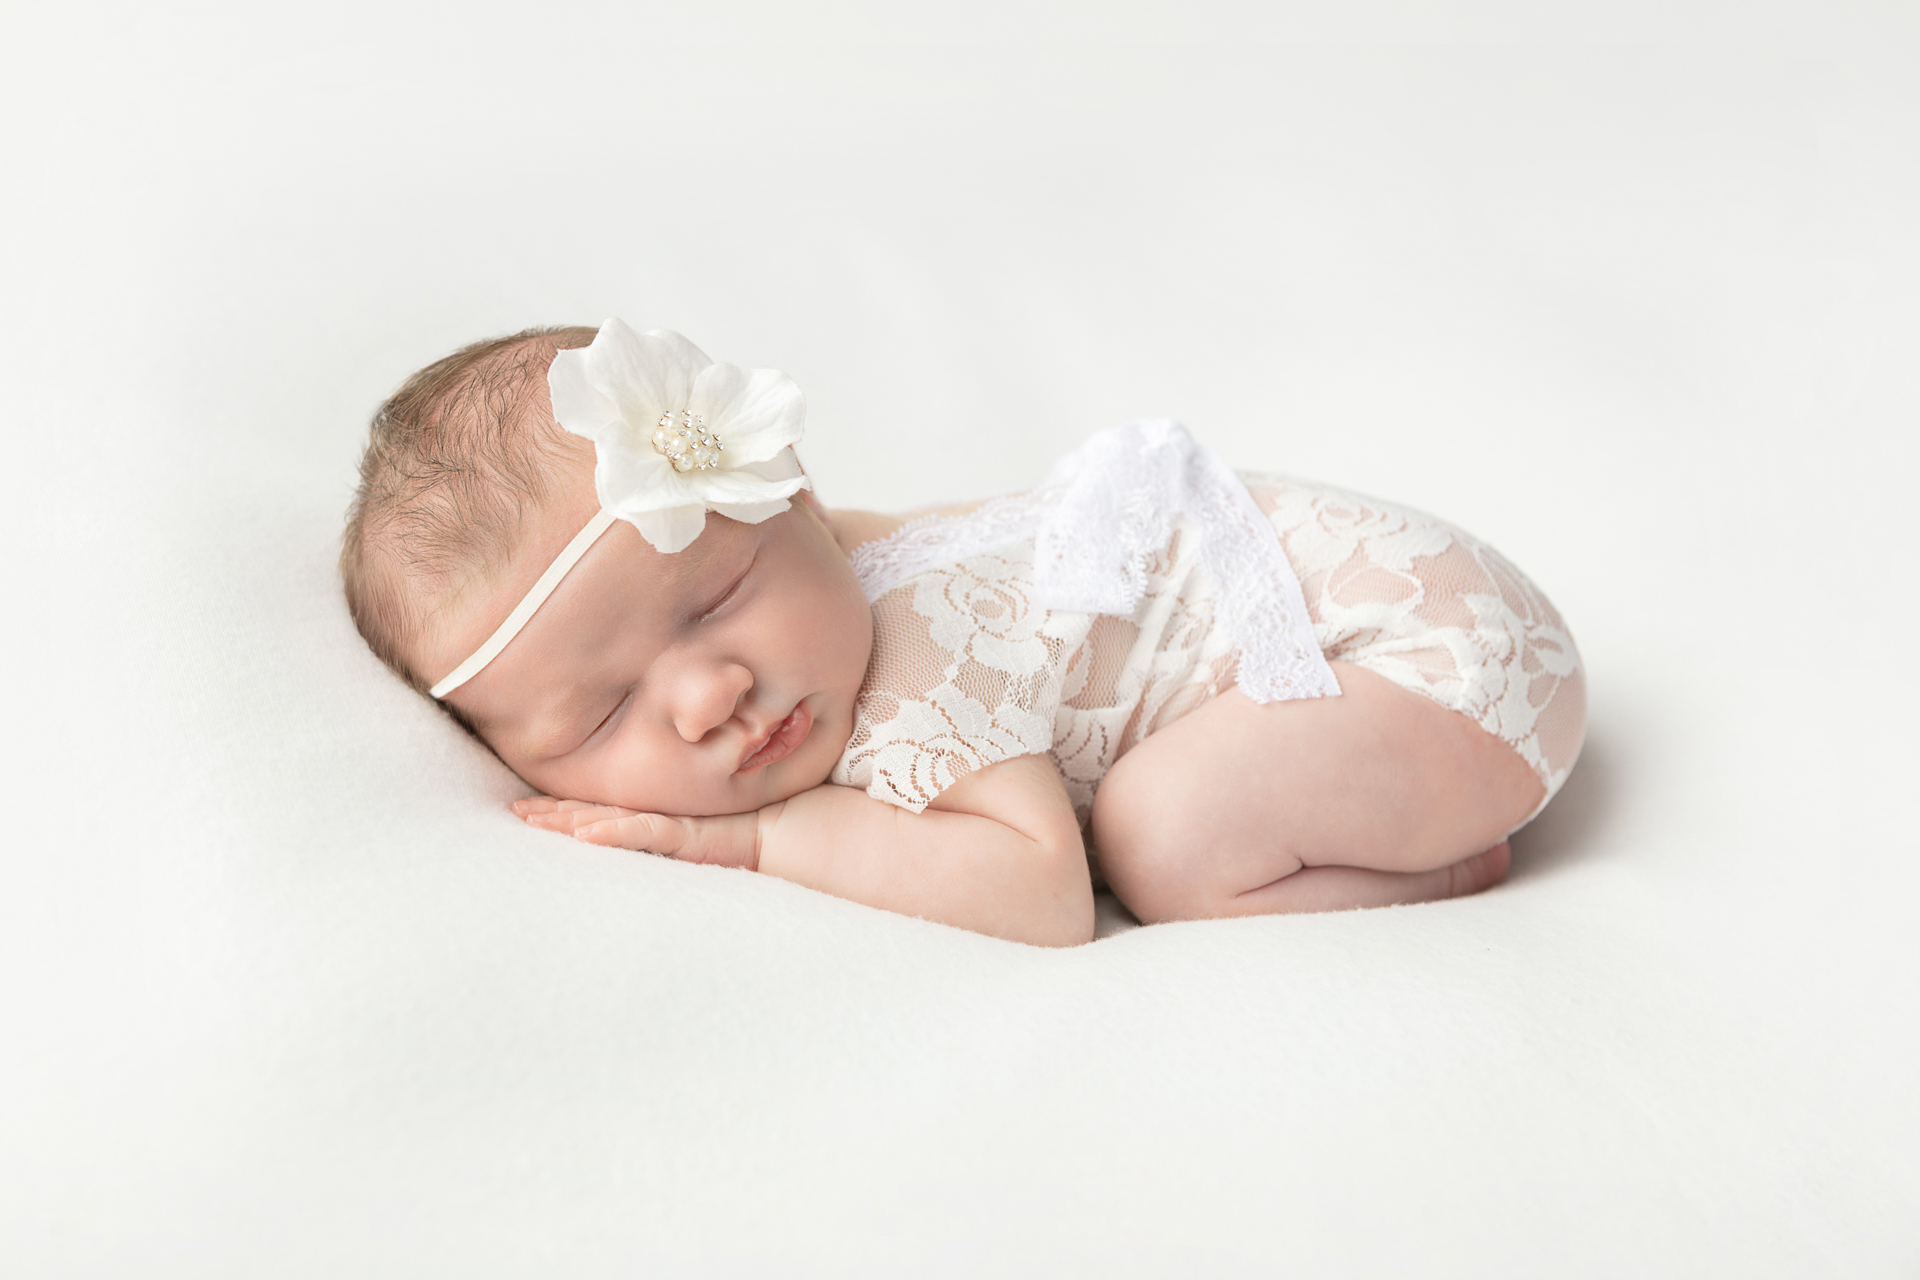 newborn baby girl in lace onesie and wearing a large white flower headband